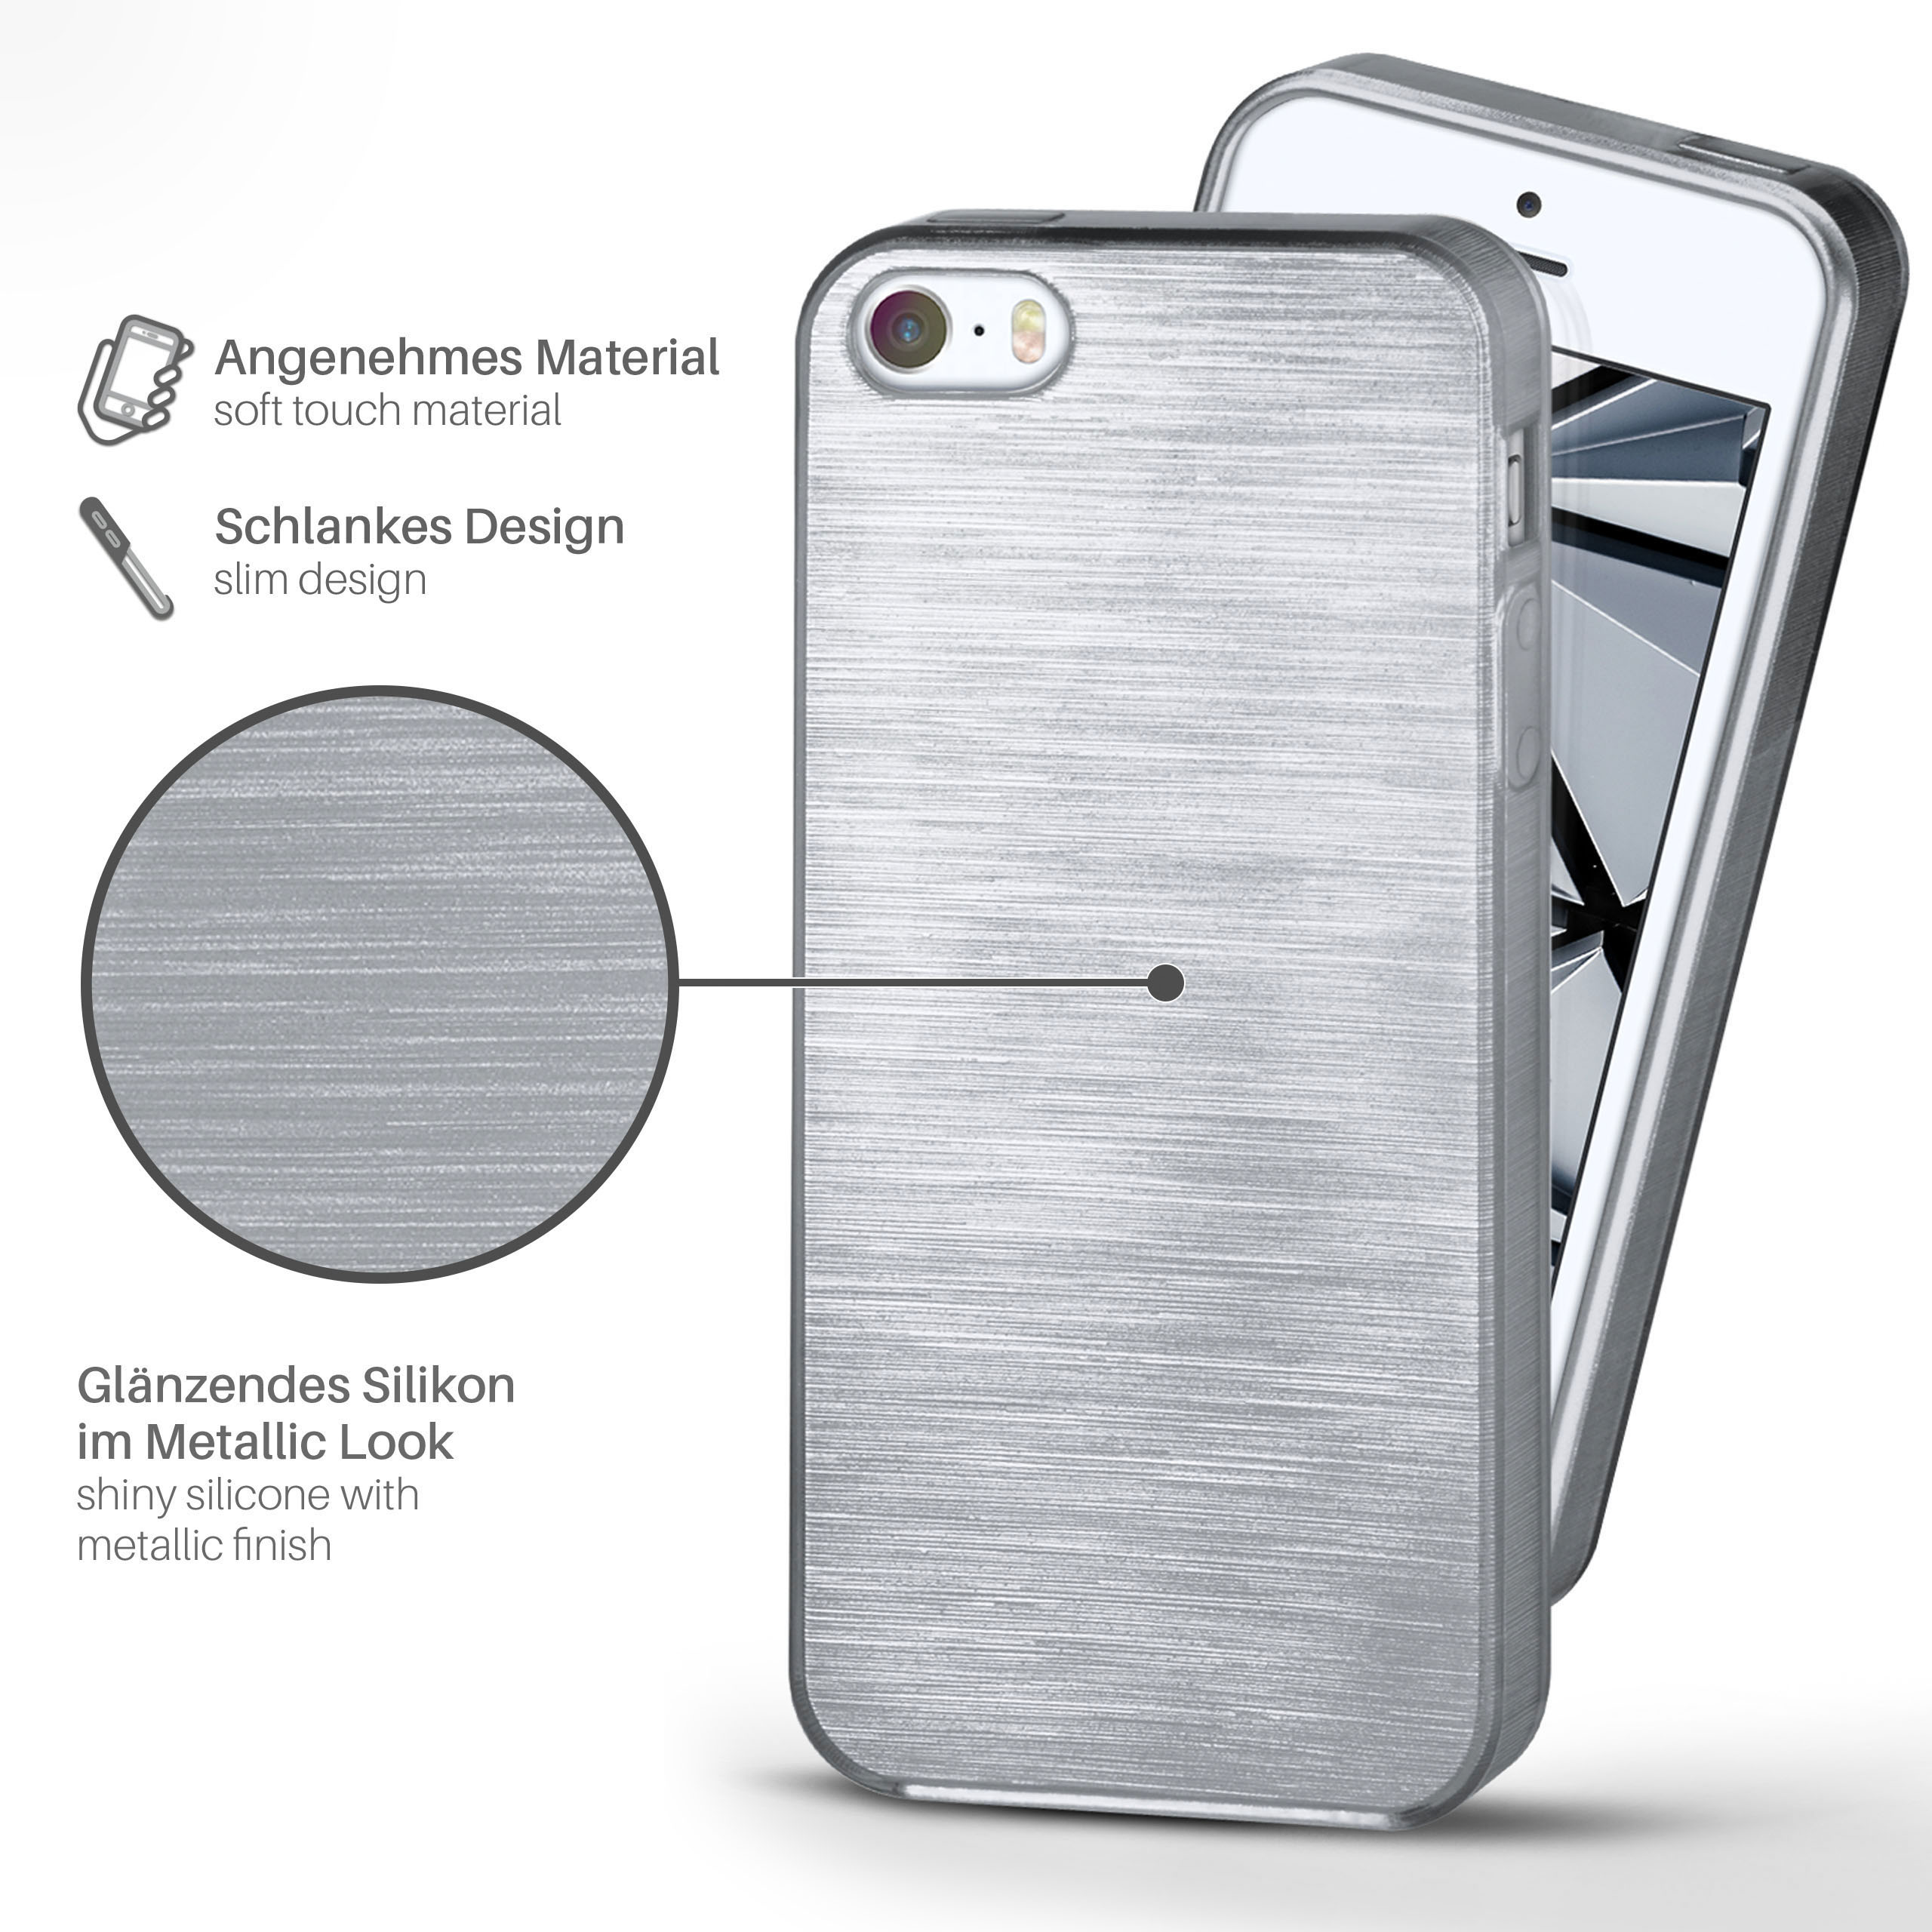 Case, 5 (2016), / MOEX iPhone 5s Platin-Silver Backcover, Brushed / Apple, SE